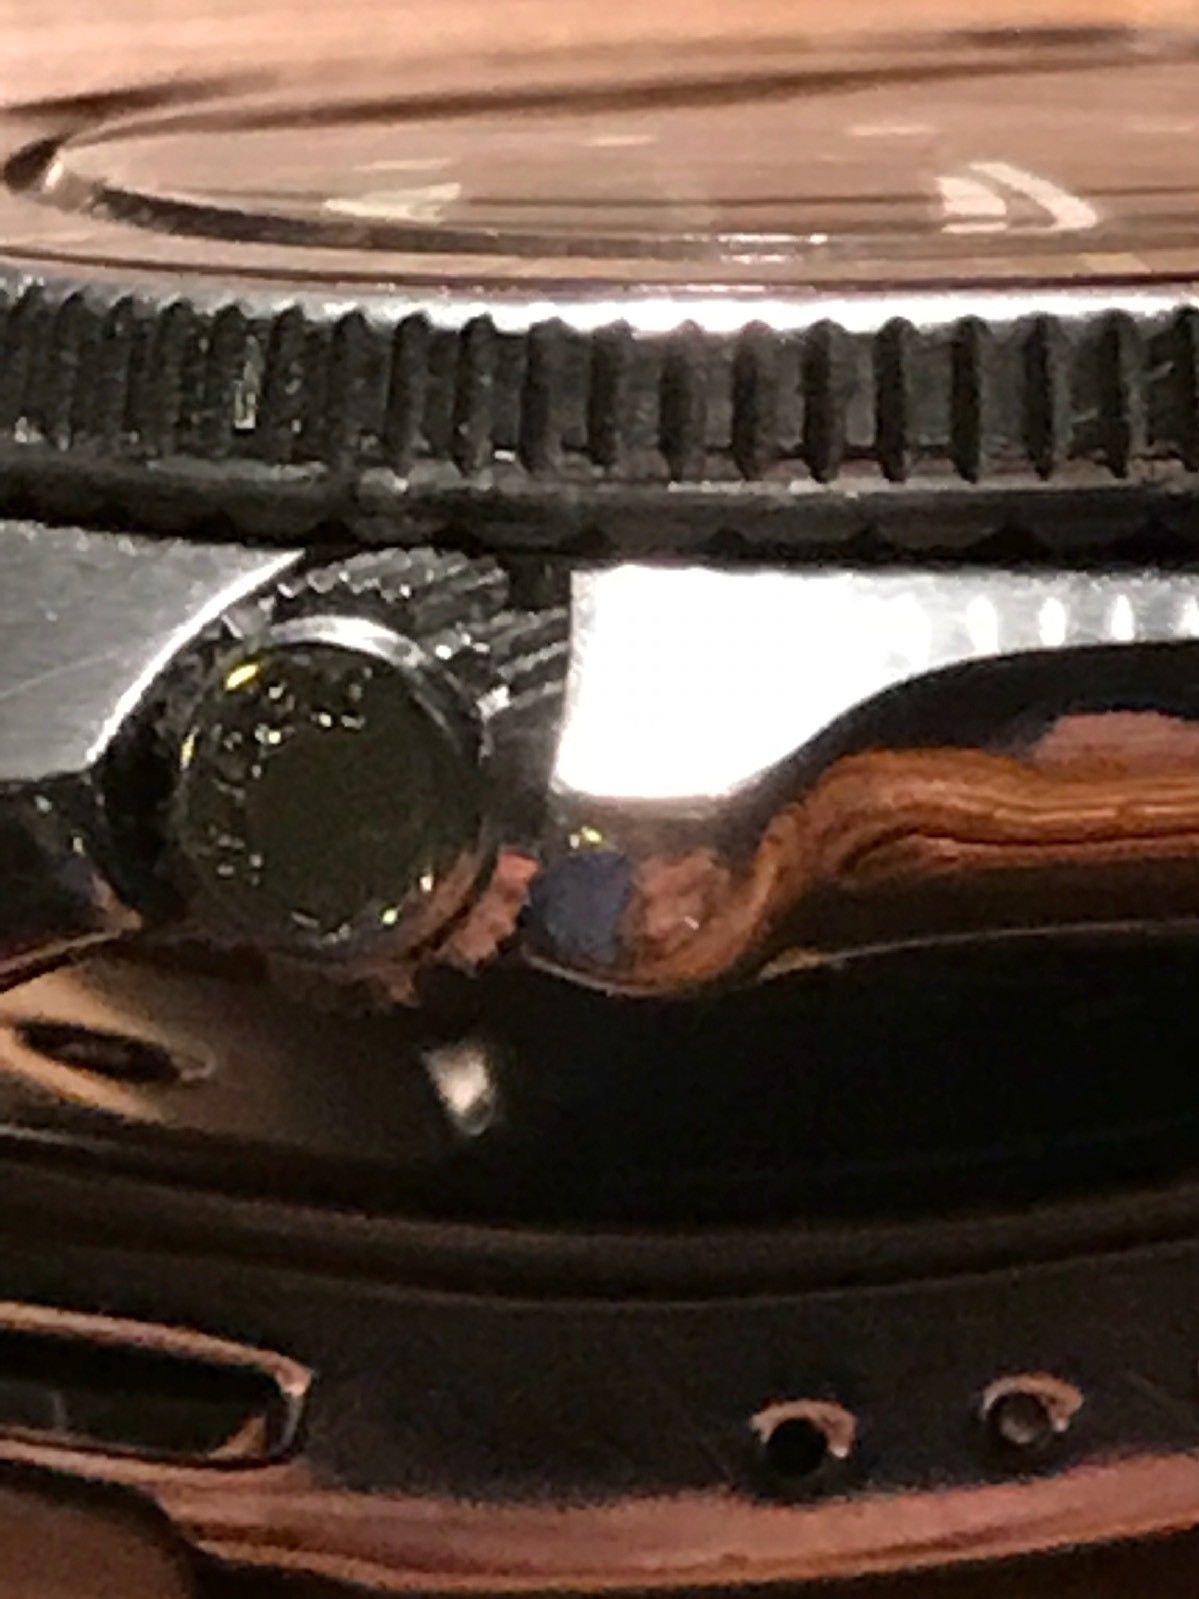 Seiko 6105-8110 questions/help | Omega Forums